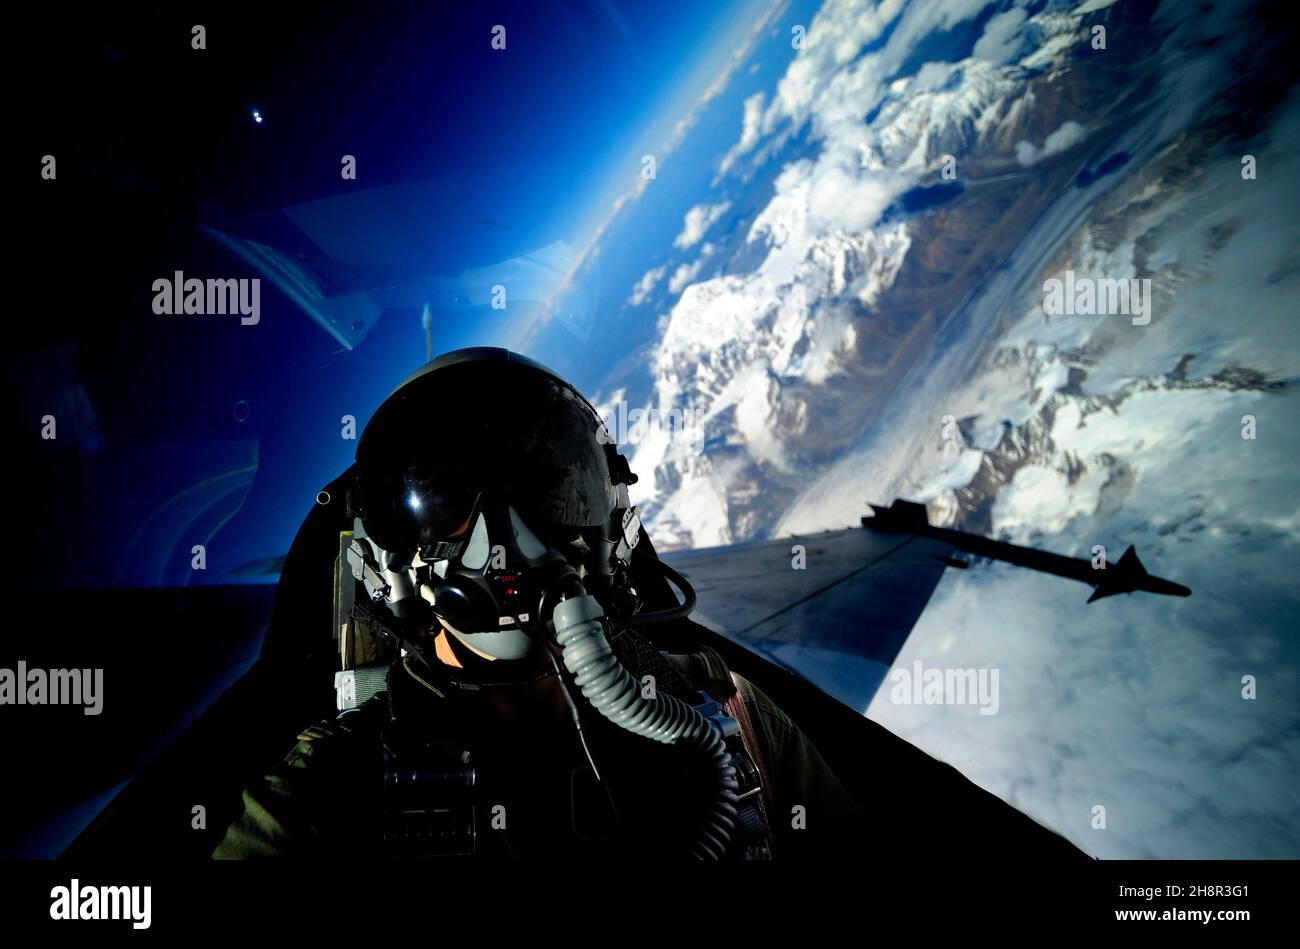 U.S. Air Force Tech. Sgt. James L. Harper Jr., from 1st Combat Camera Squadron, takes a self portrait in an F-16 Fighting Falcon from the 18th Aggressor Squadron June 24, 2010, during exercise Red Flag-Alaska. (U.S. Air Force photo by Tech. Sgt. James L. Harper Jr./Released) Stock Photo